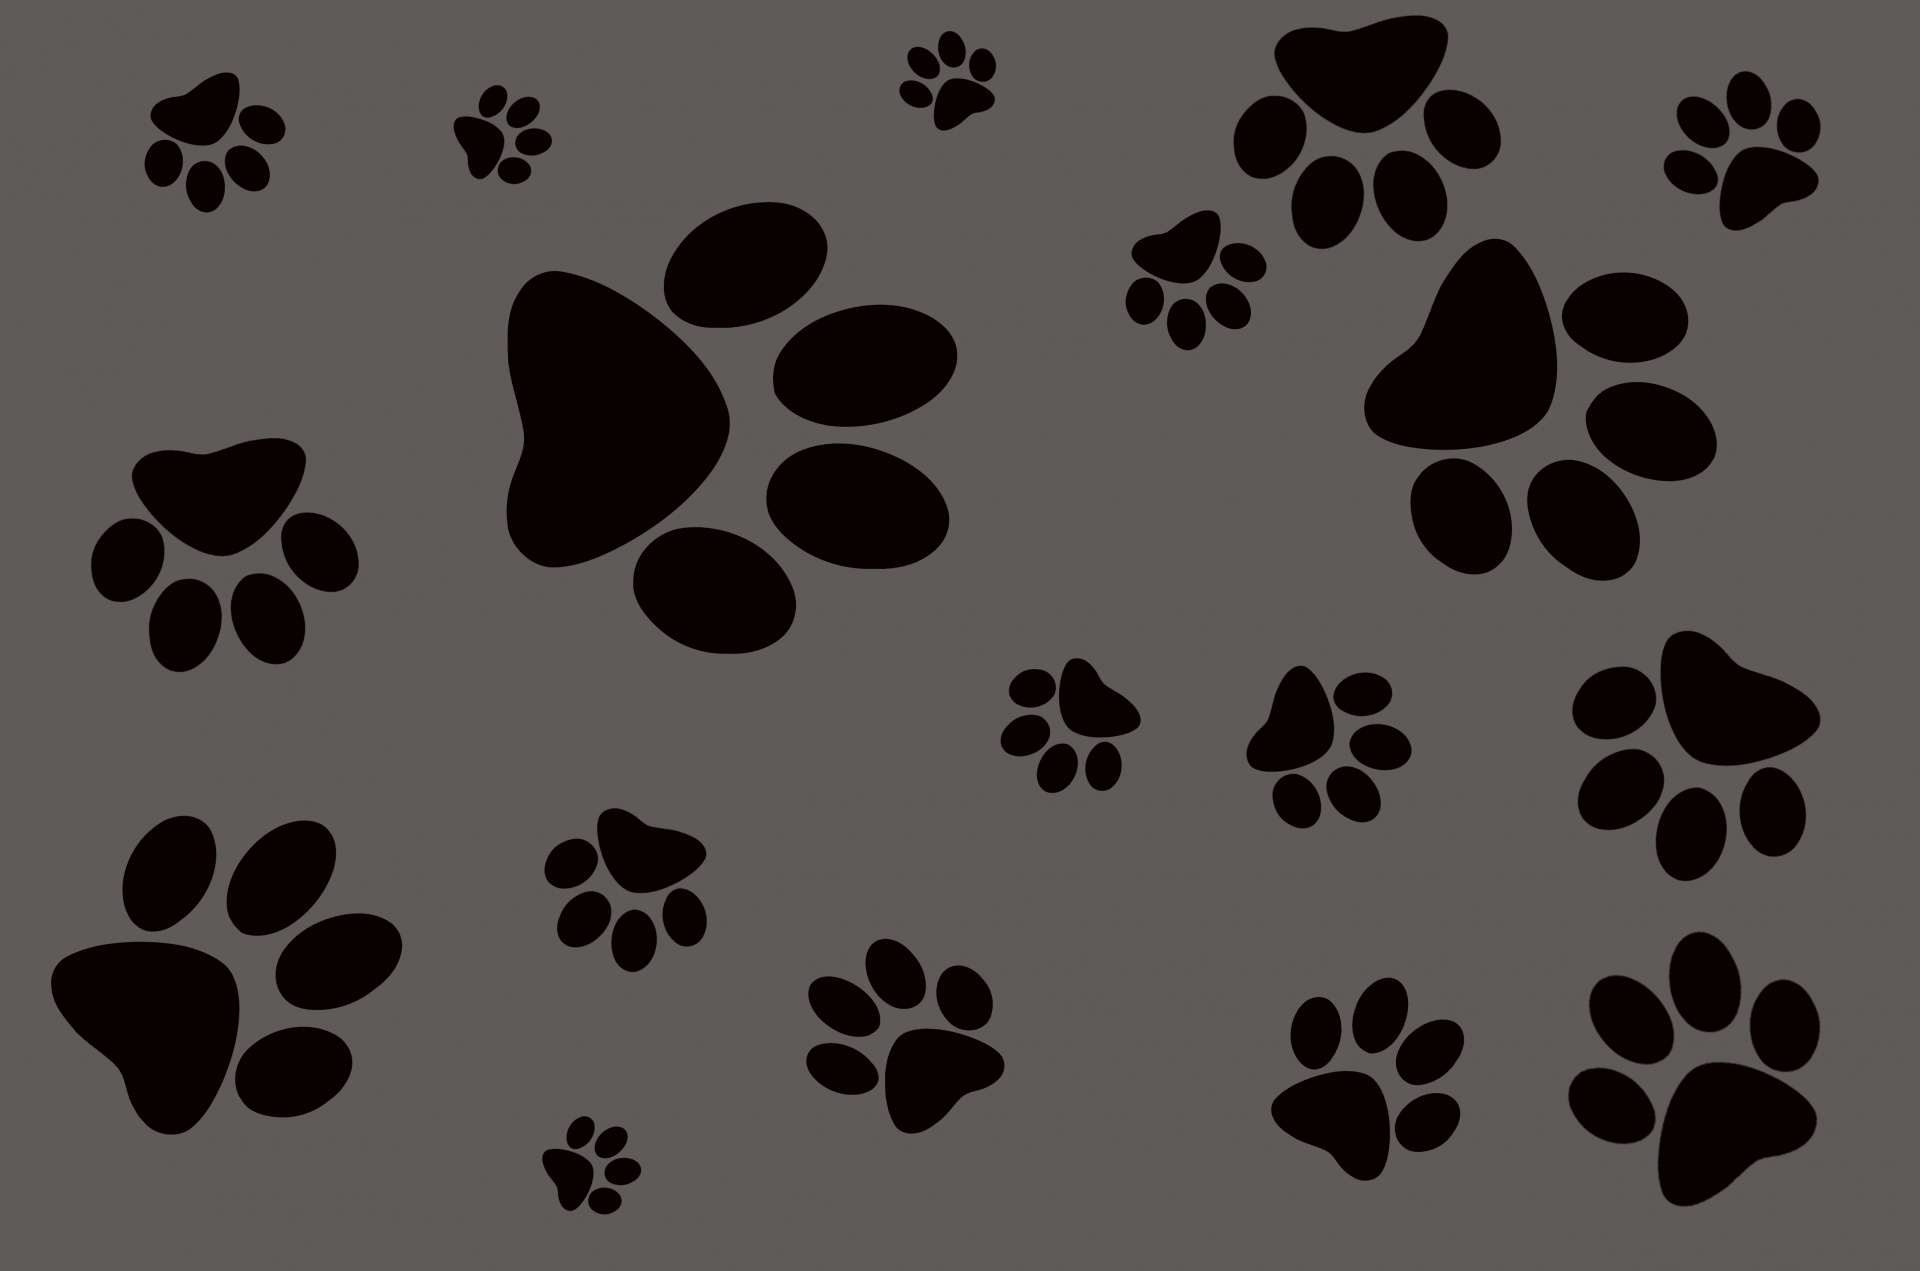 Download Background Pawprint Cat Free Photo.